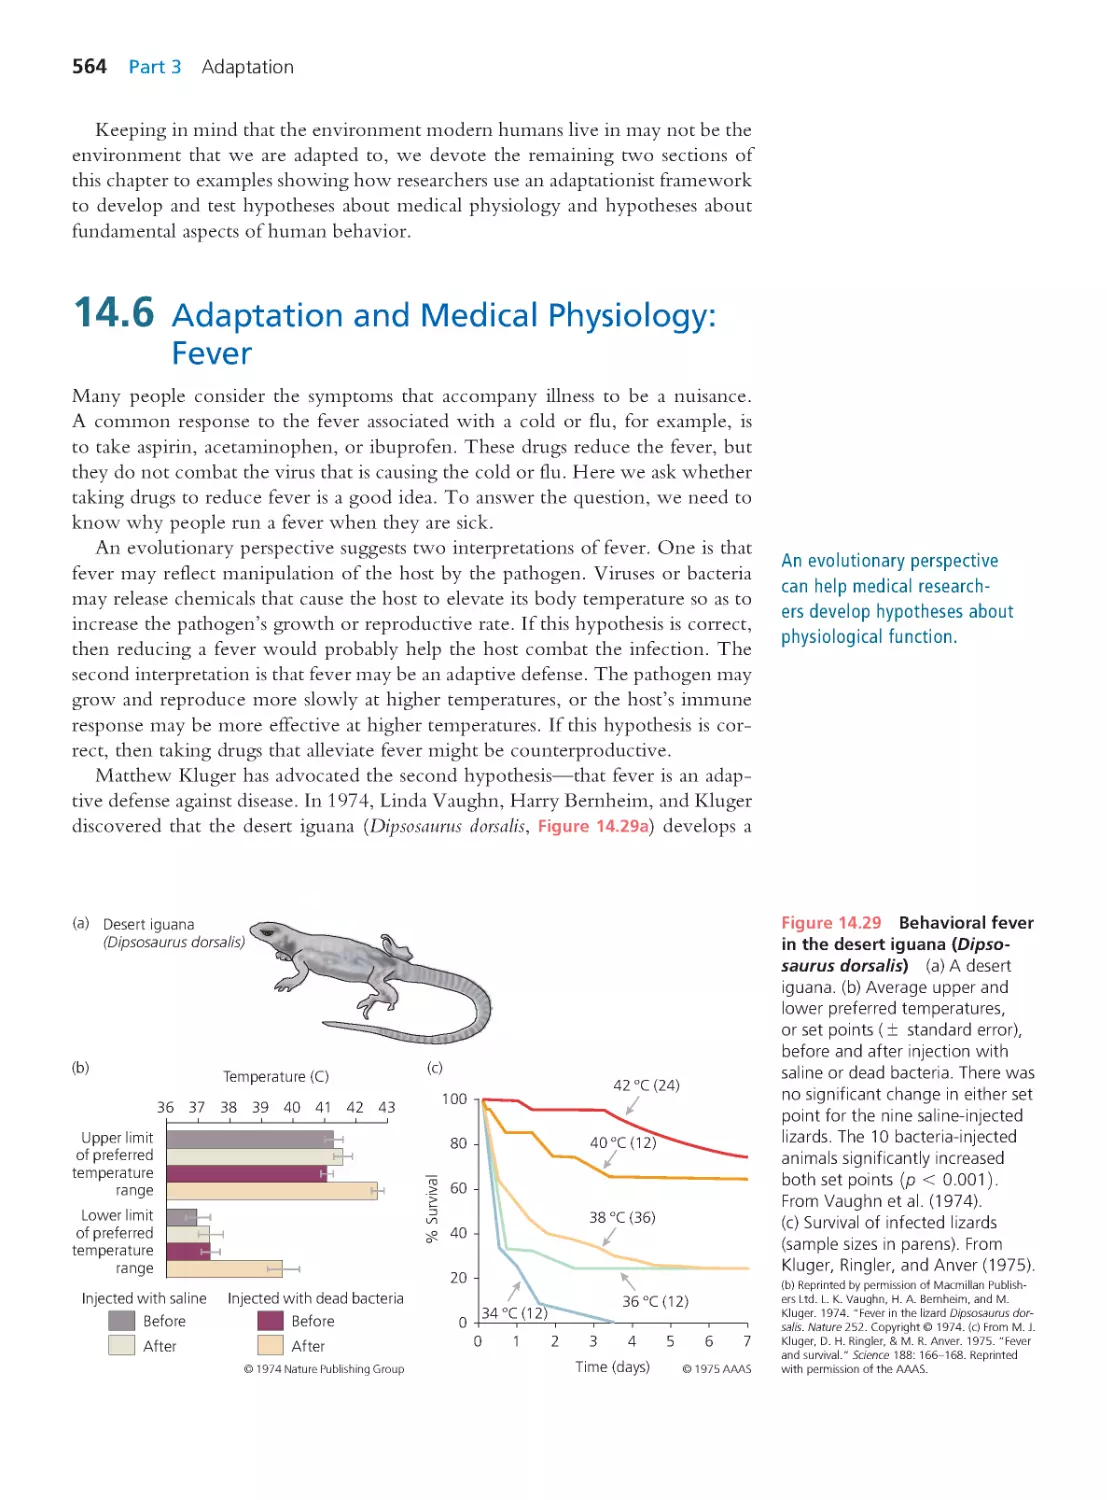 14.6 Adaptation and Medical Physiology: Fever